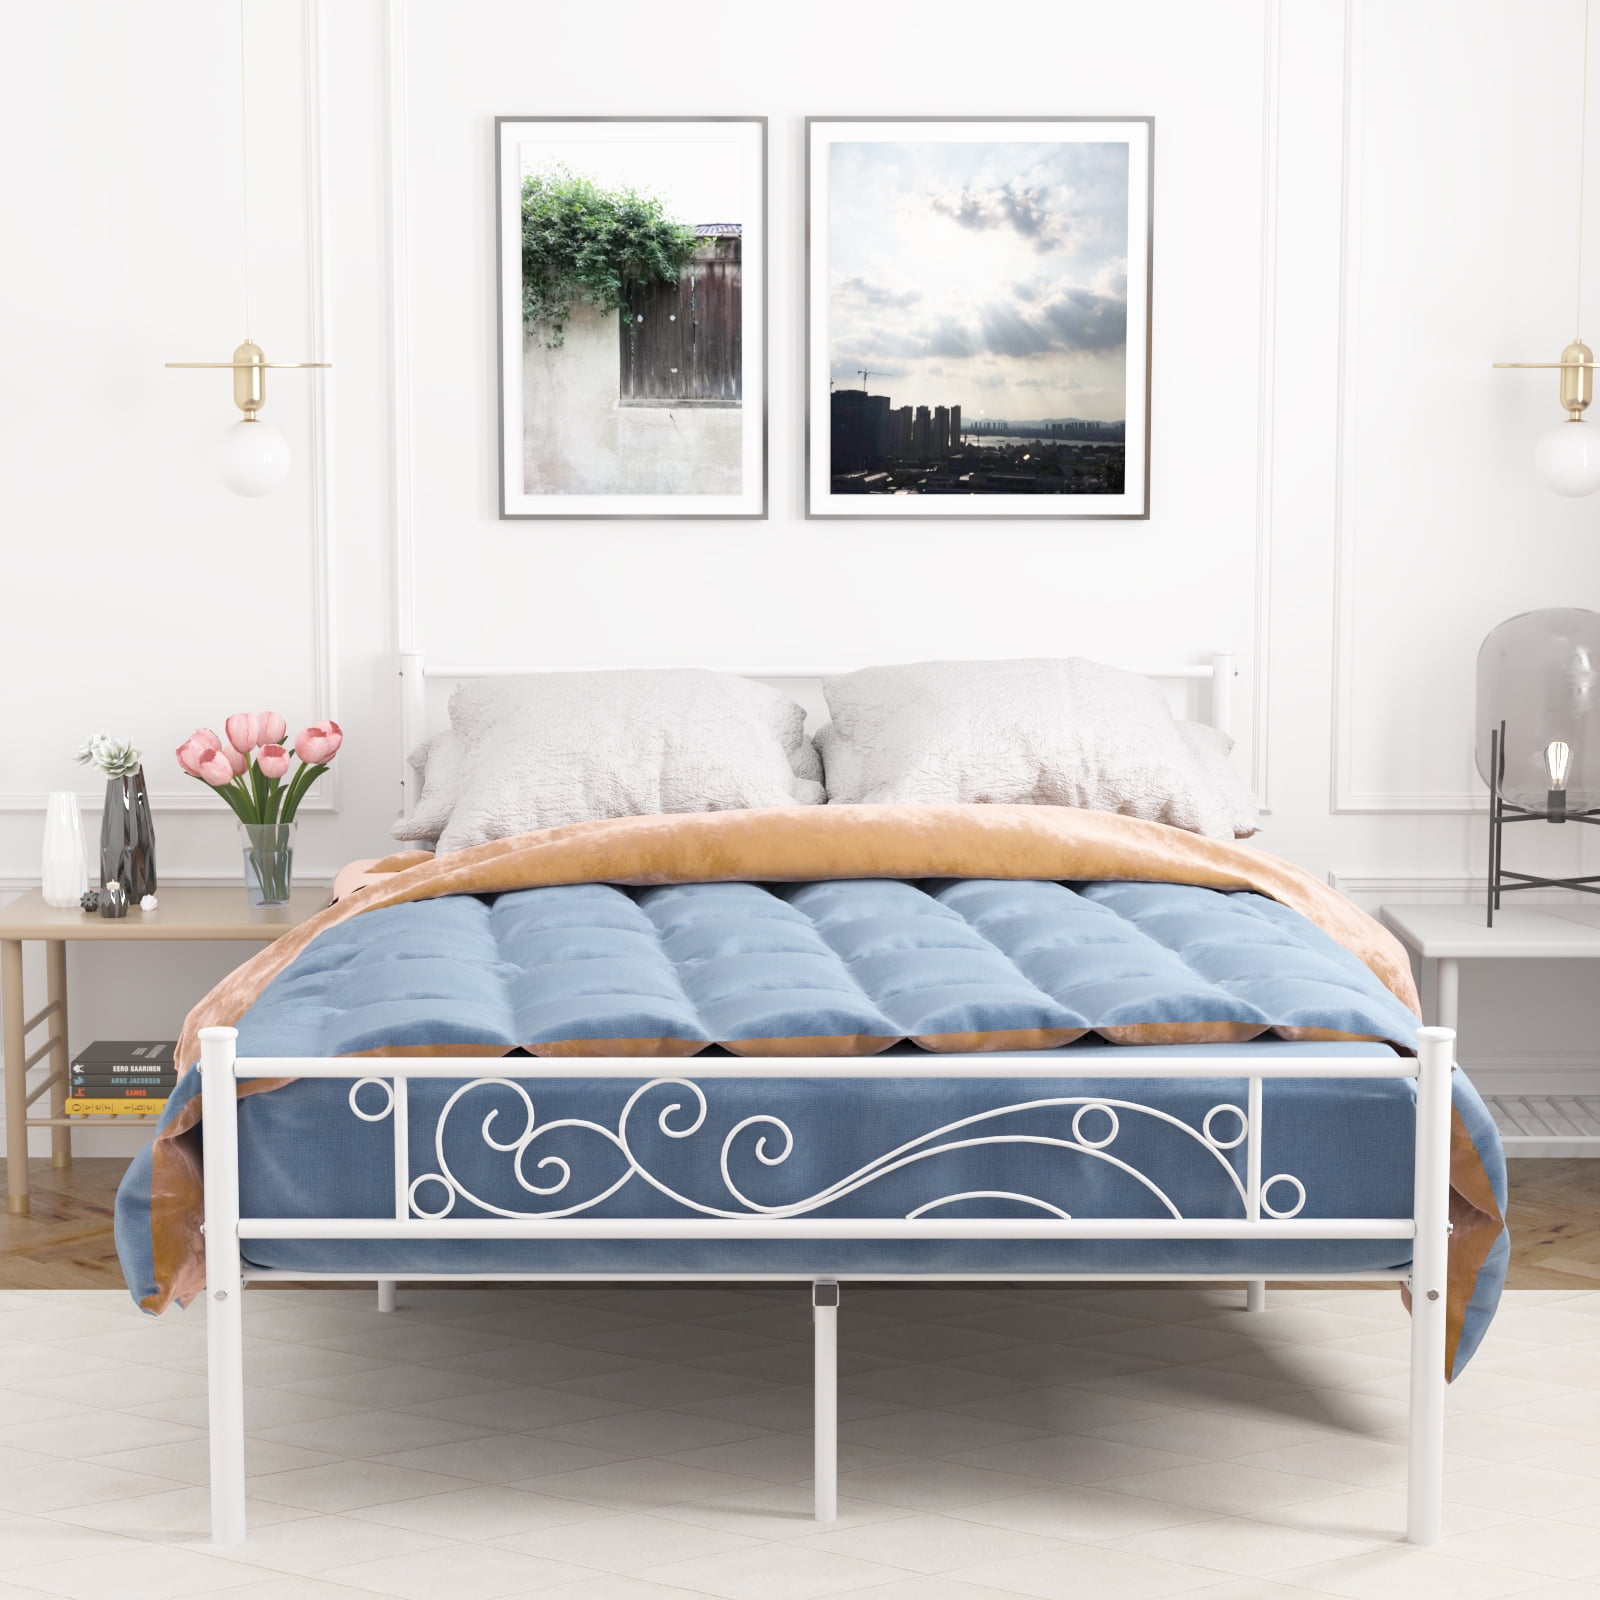 Yoneston Metal Platform Bed Frame Twin Size Single Bed frame with Wave Headboard & Footboard for Adult Bedroom Furniture, White